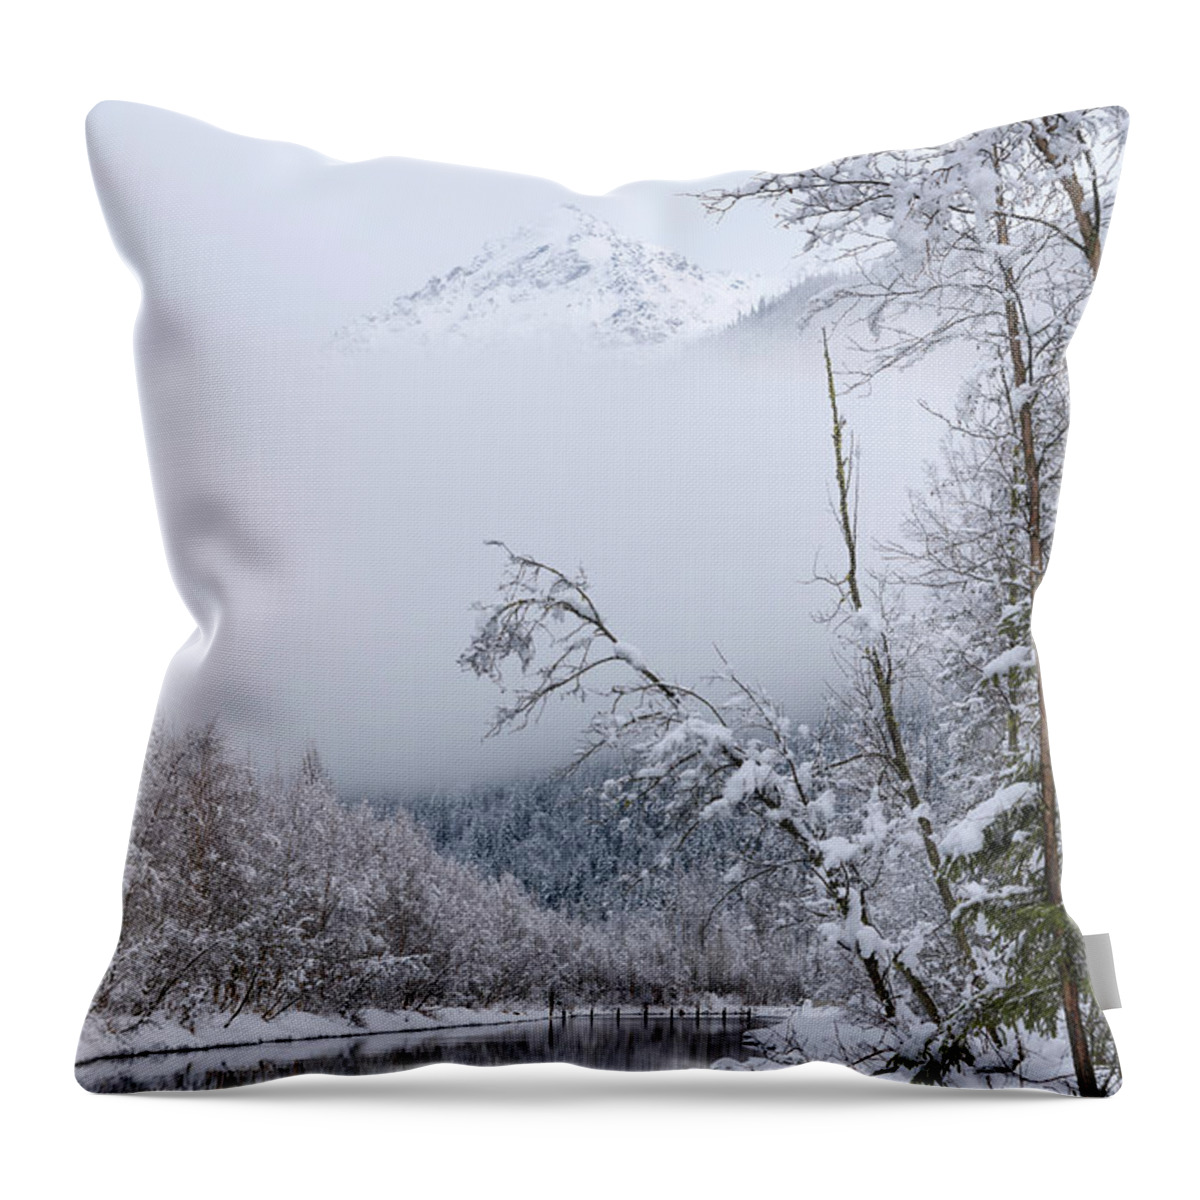 Alaska Throw Pillow featuring the photograph Winter by Chad Dutson